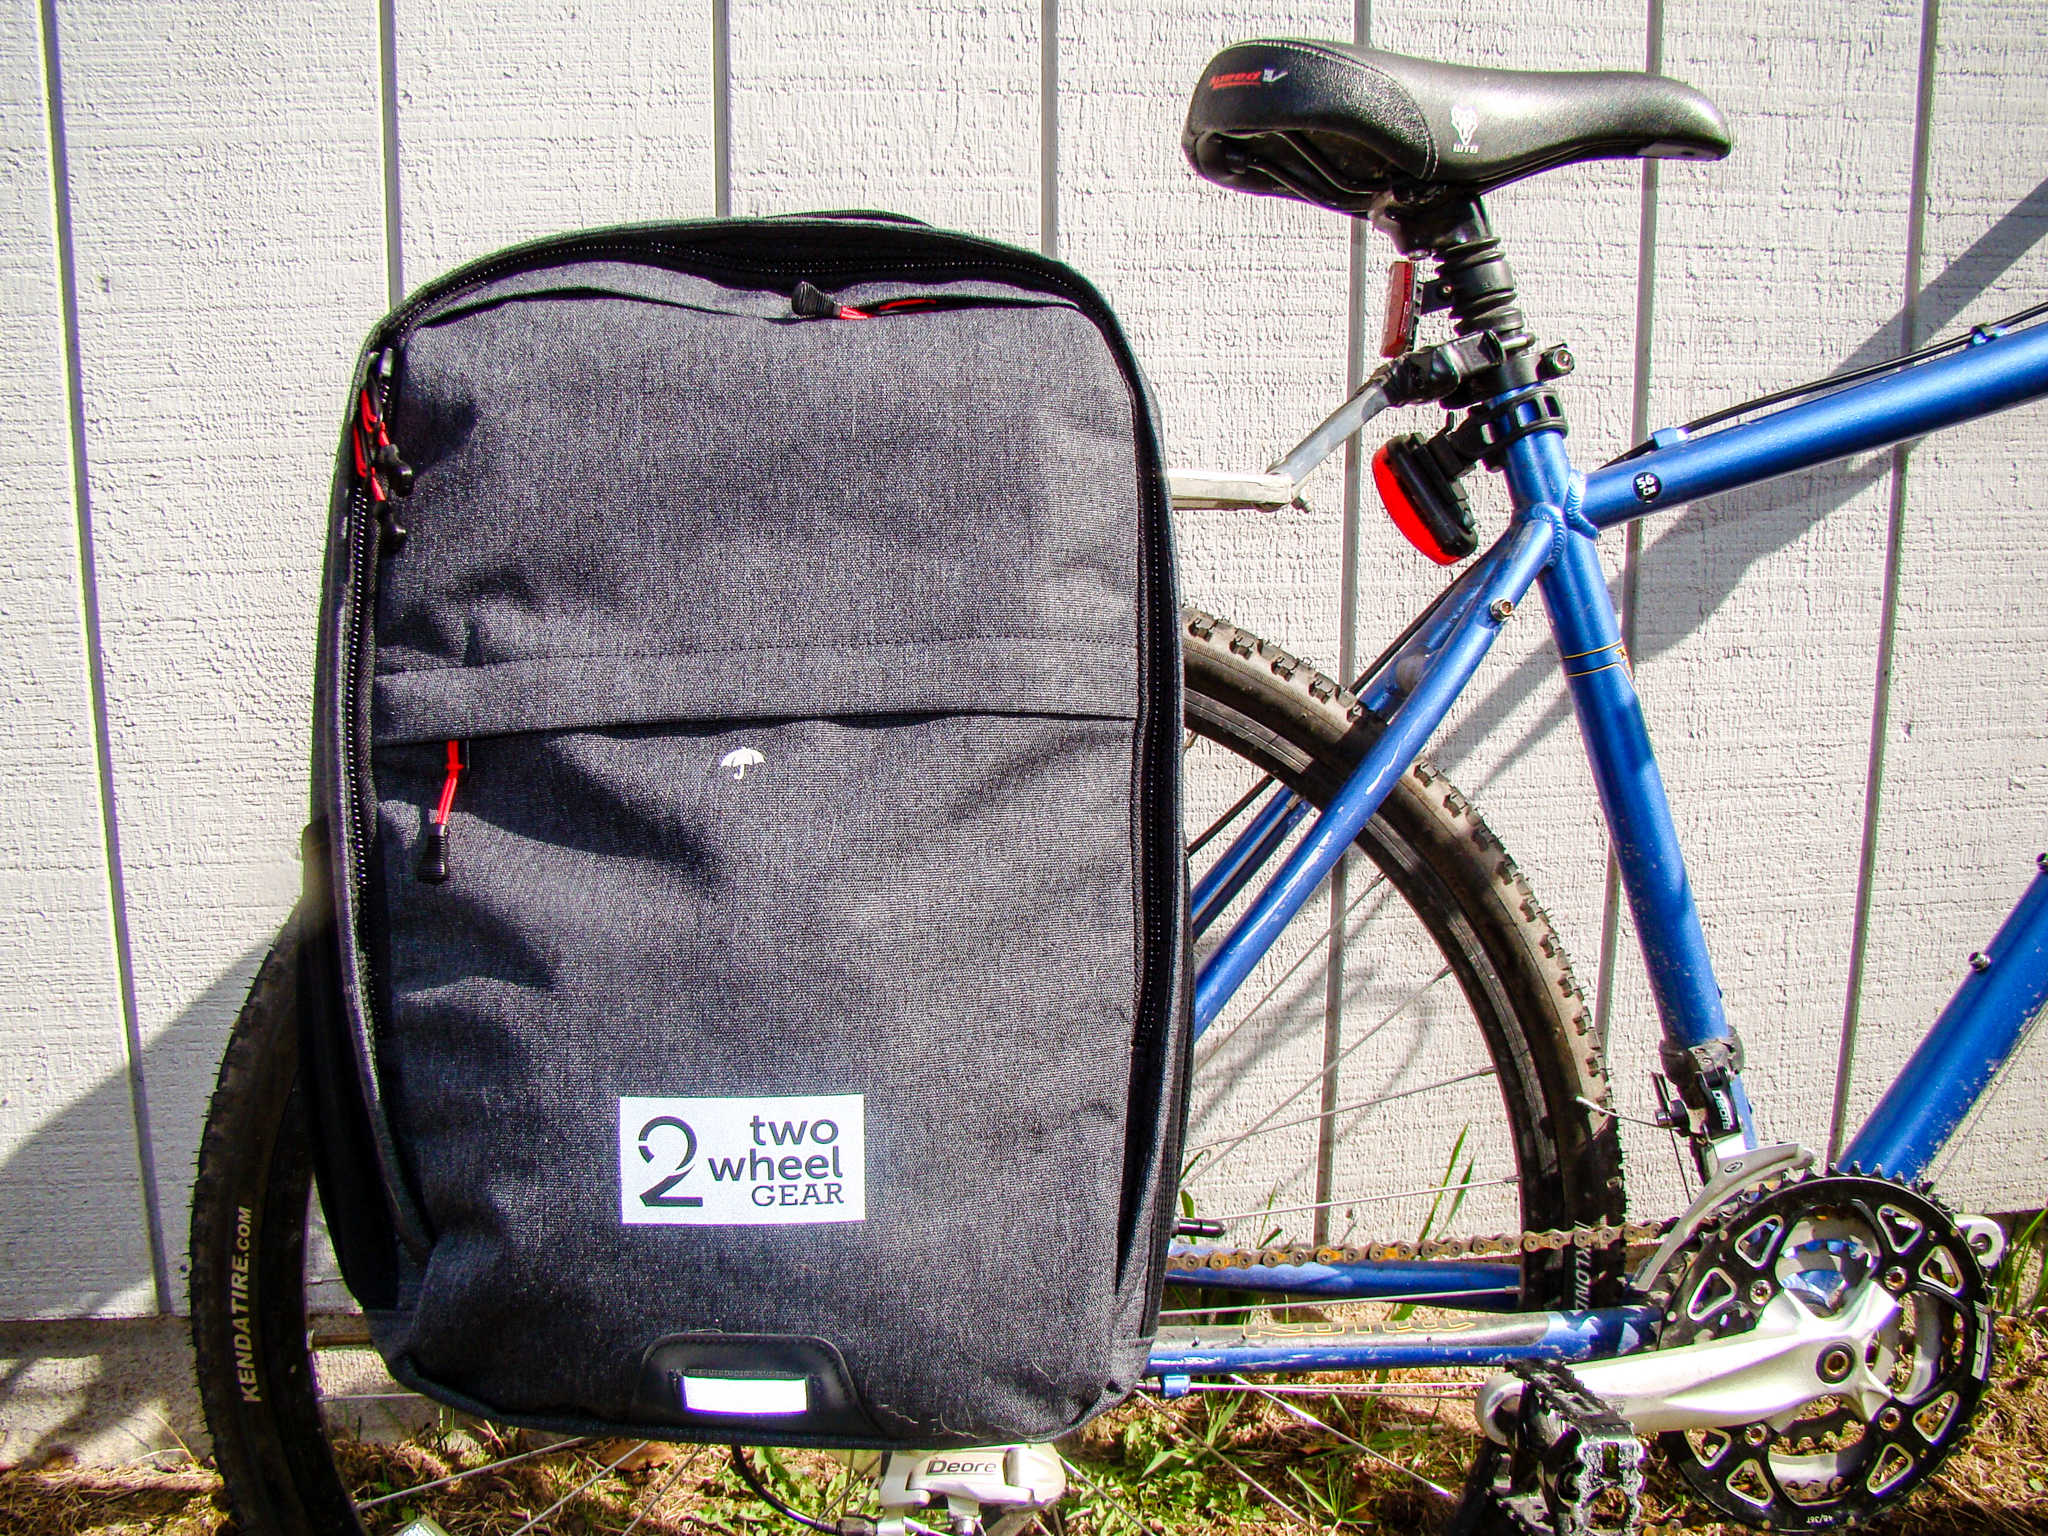 Get more out of your commute with one or two of these pannier backpacks.